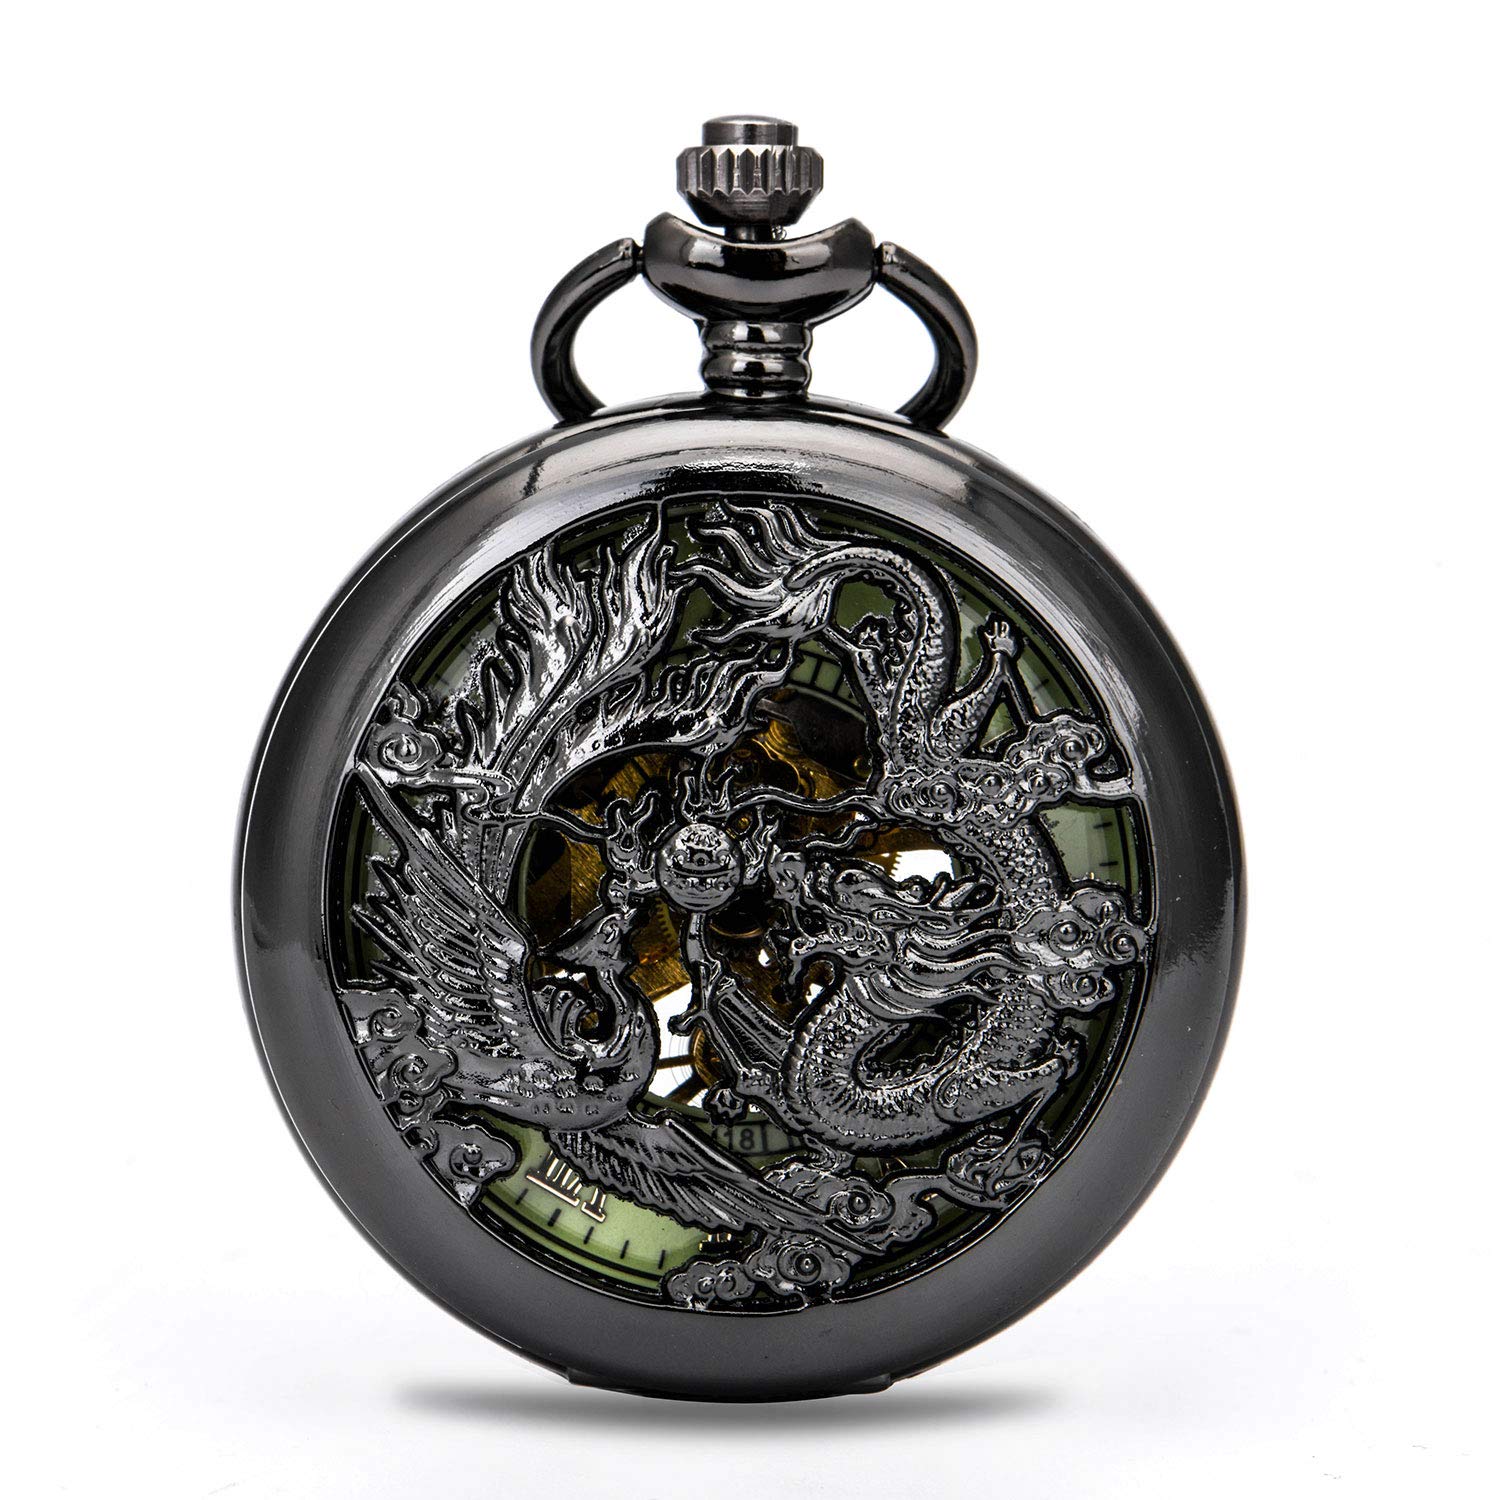 BOSHIYA Vintage Mechanical Pocket Watches for Men Luminous Steampunk Pocket Watch with Chain Black Skeleton Dial Roman Numberals Pocketwatch Gifts for Fathers Day